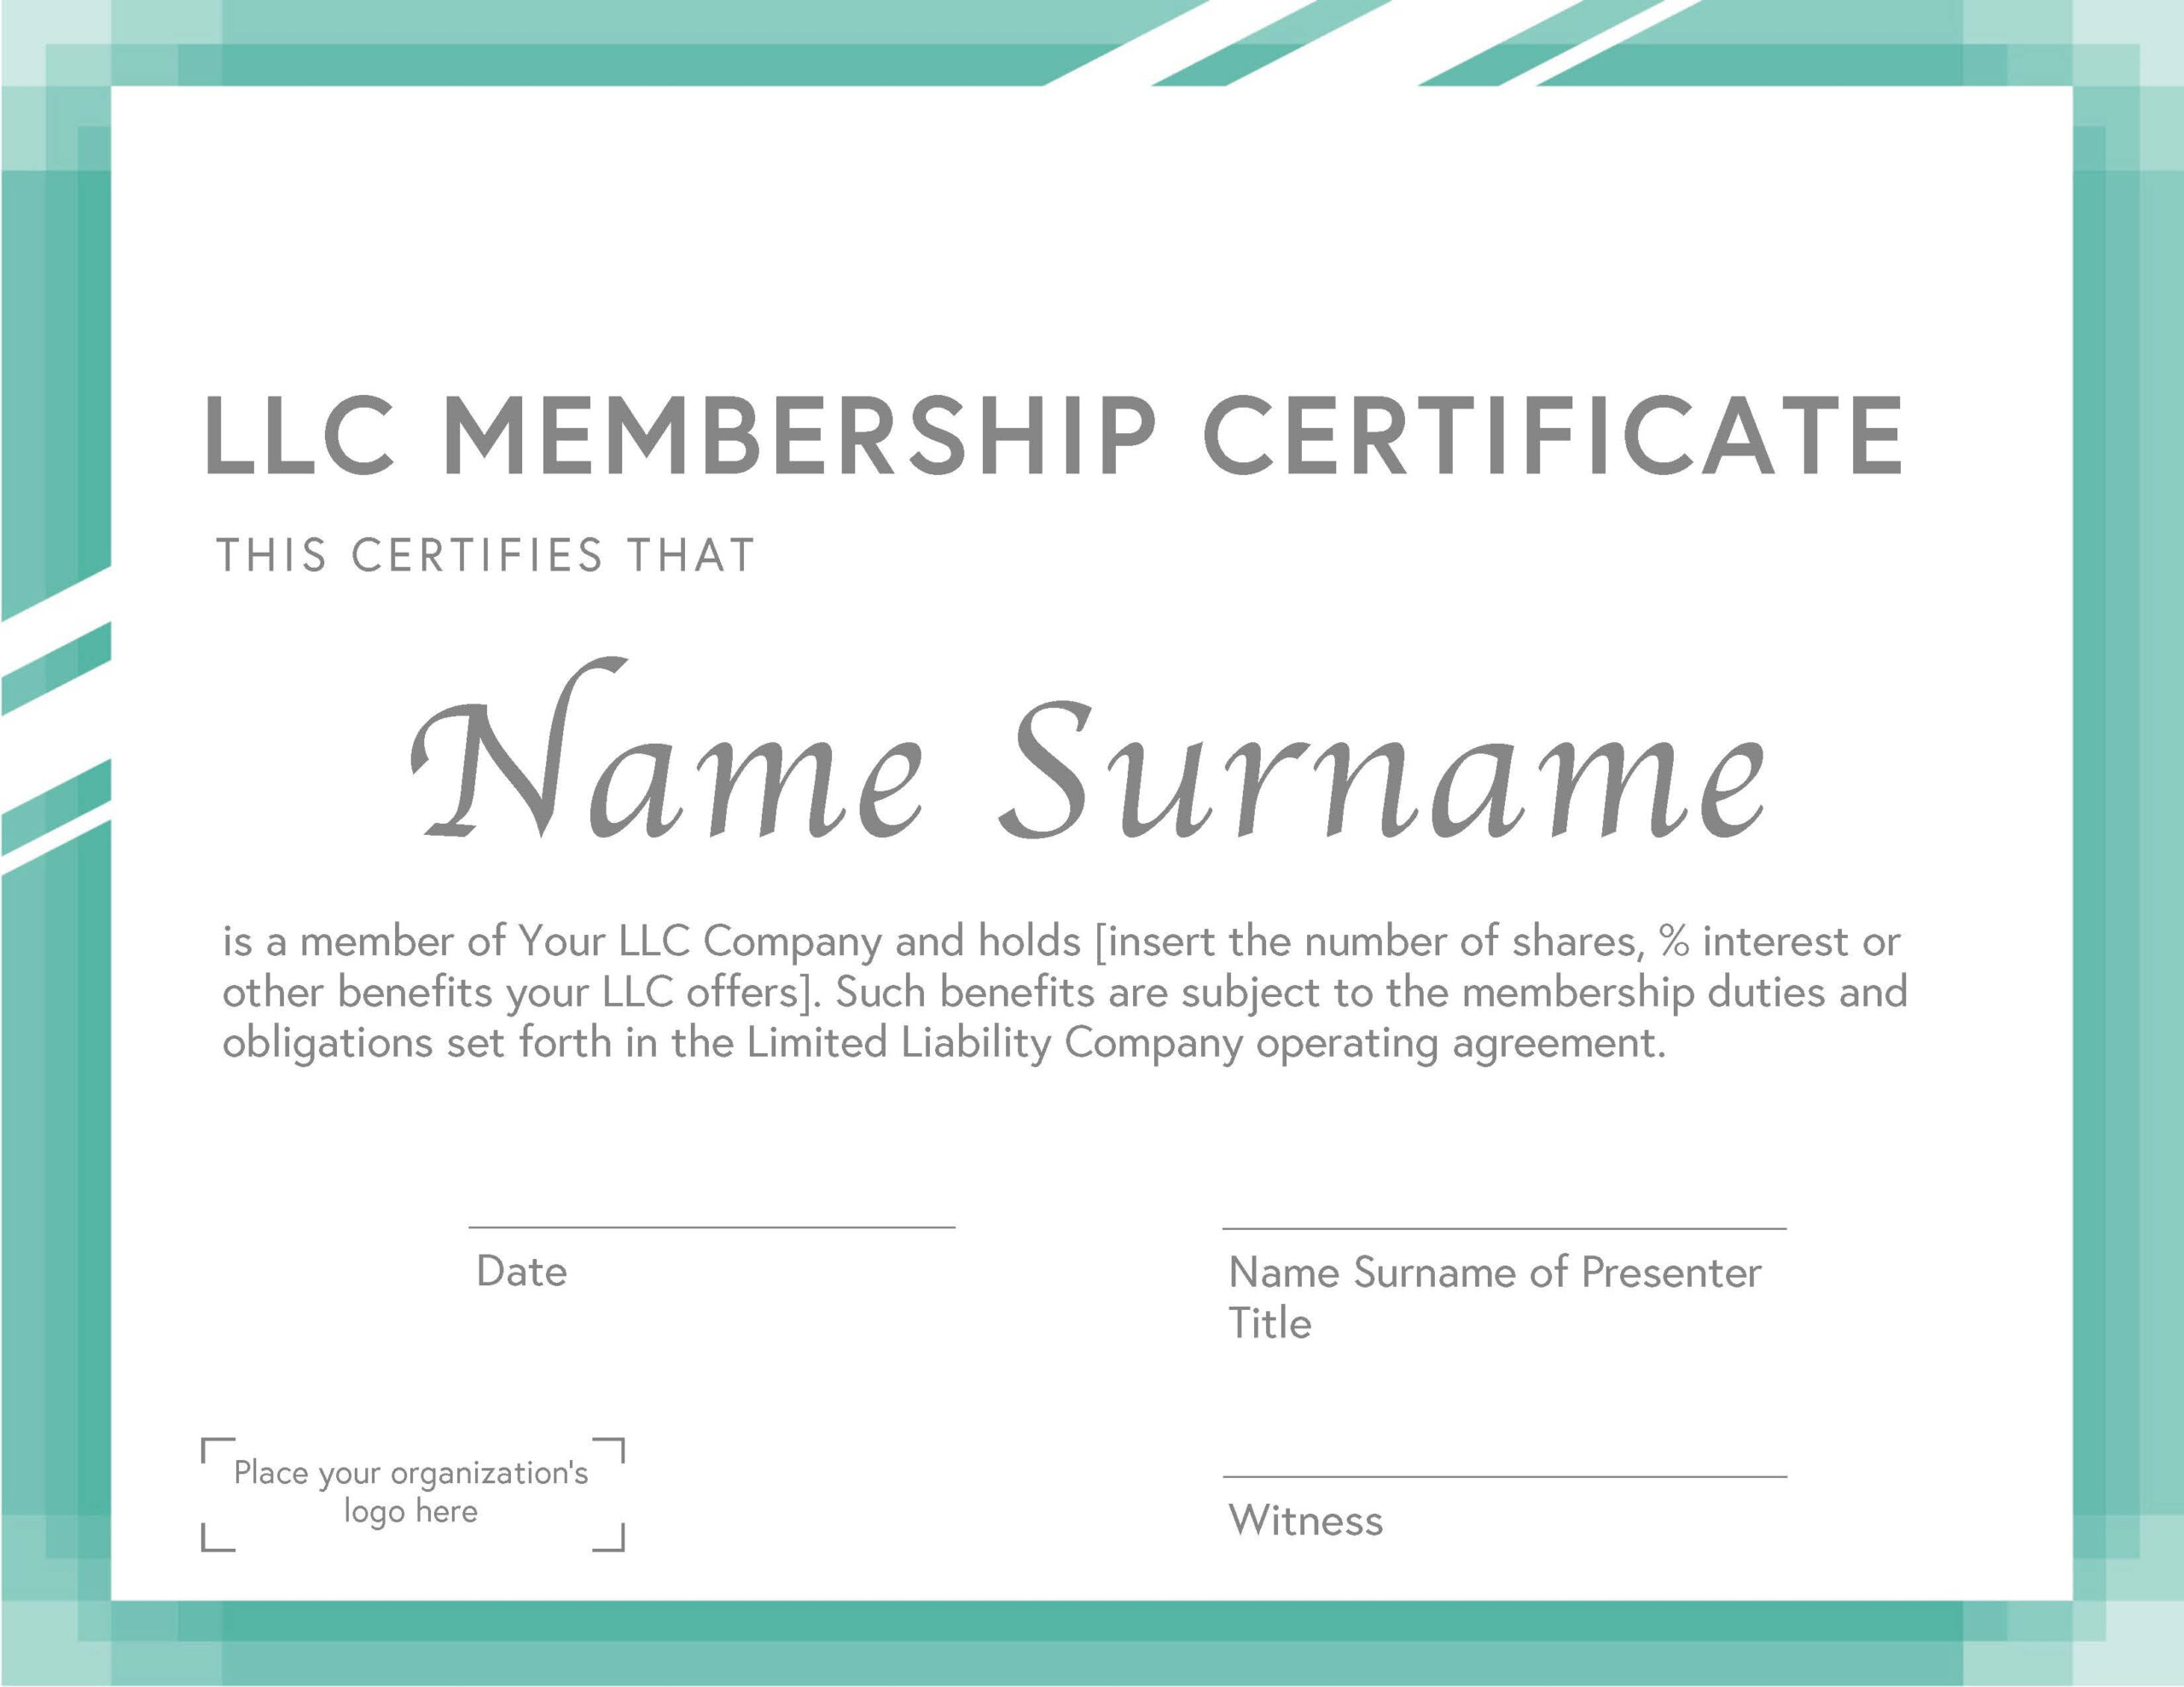 10 Free Membership Certificate Templates for Any Occasion Within Llc Membership Certificate Template